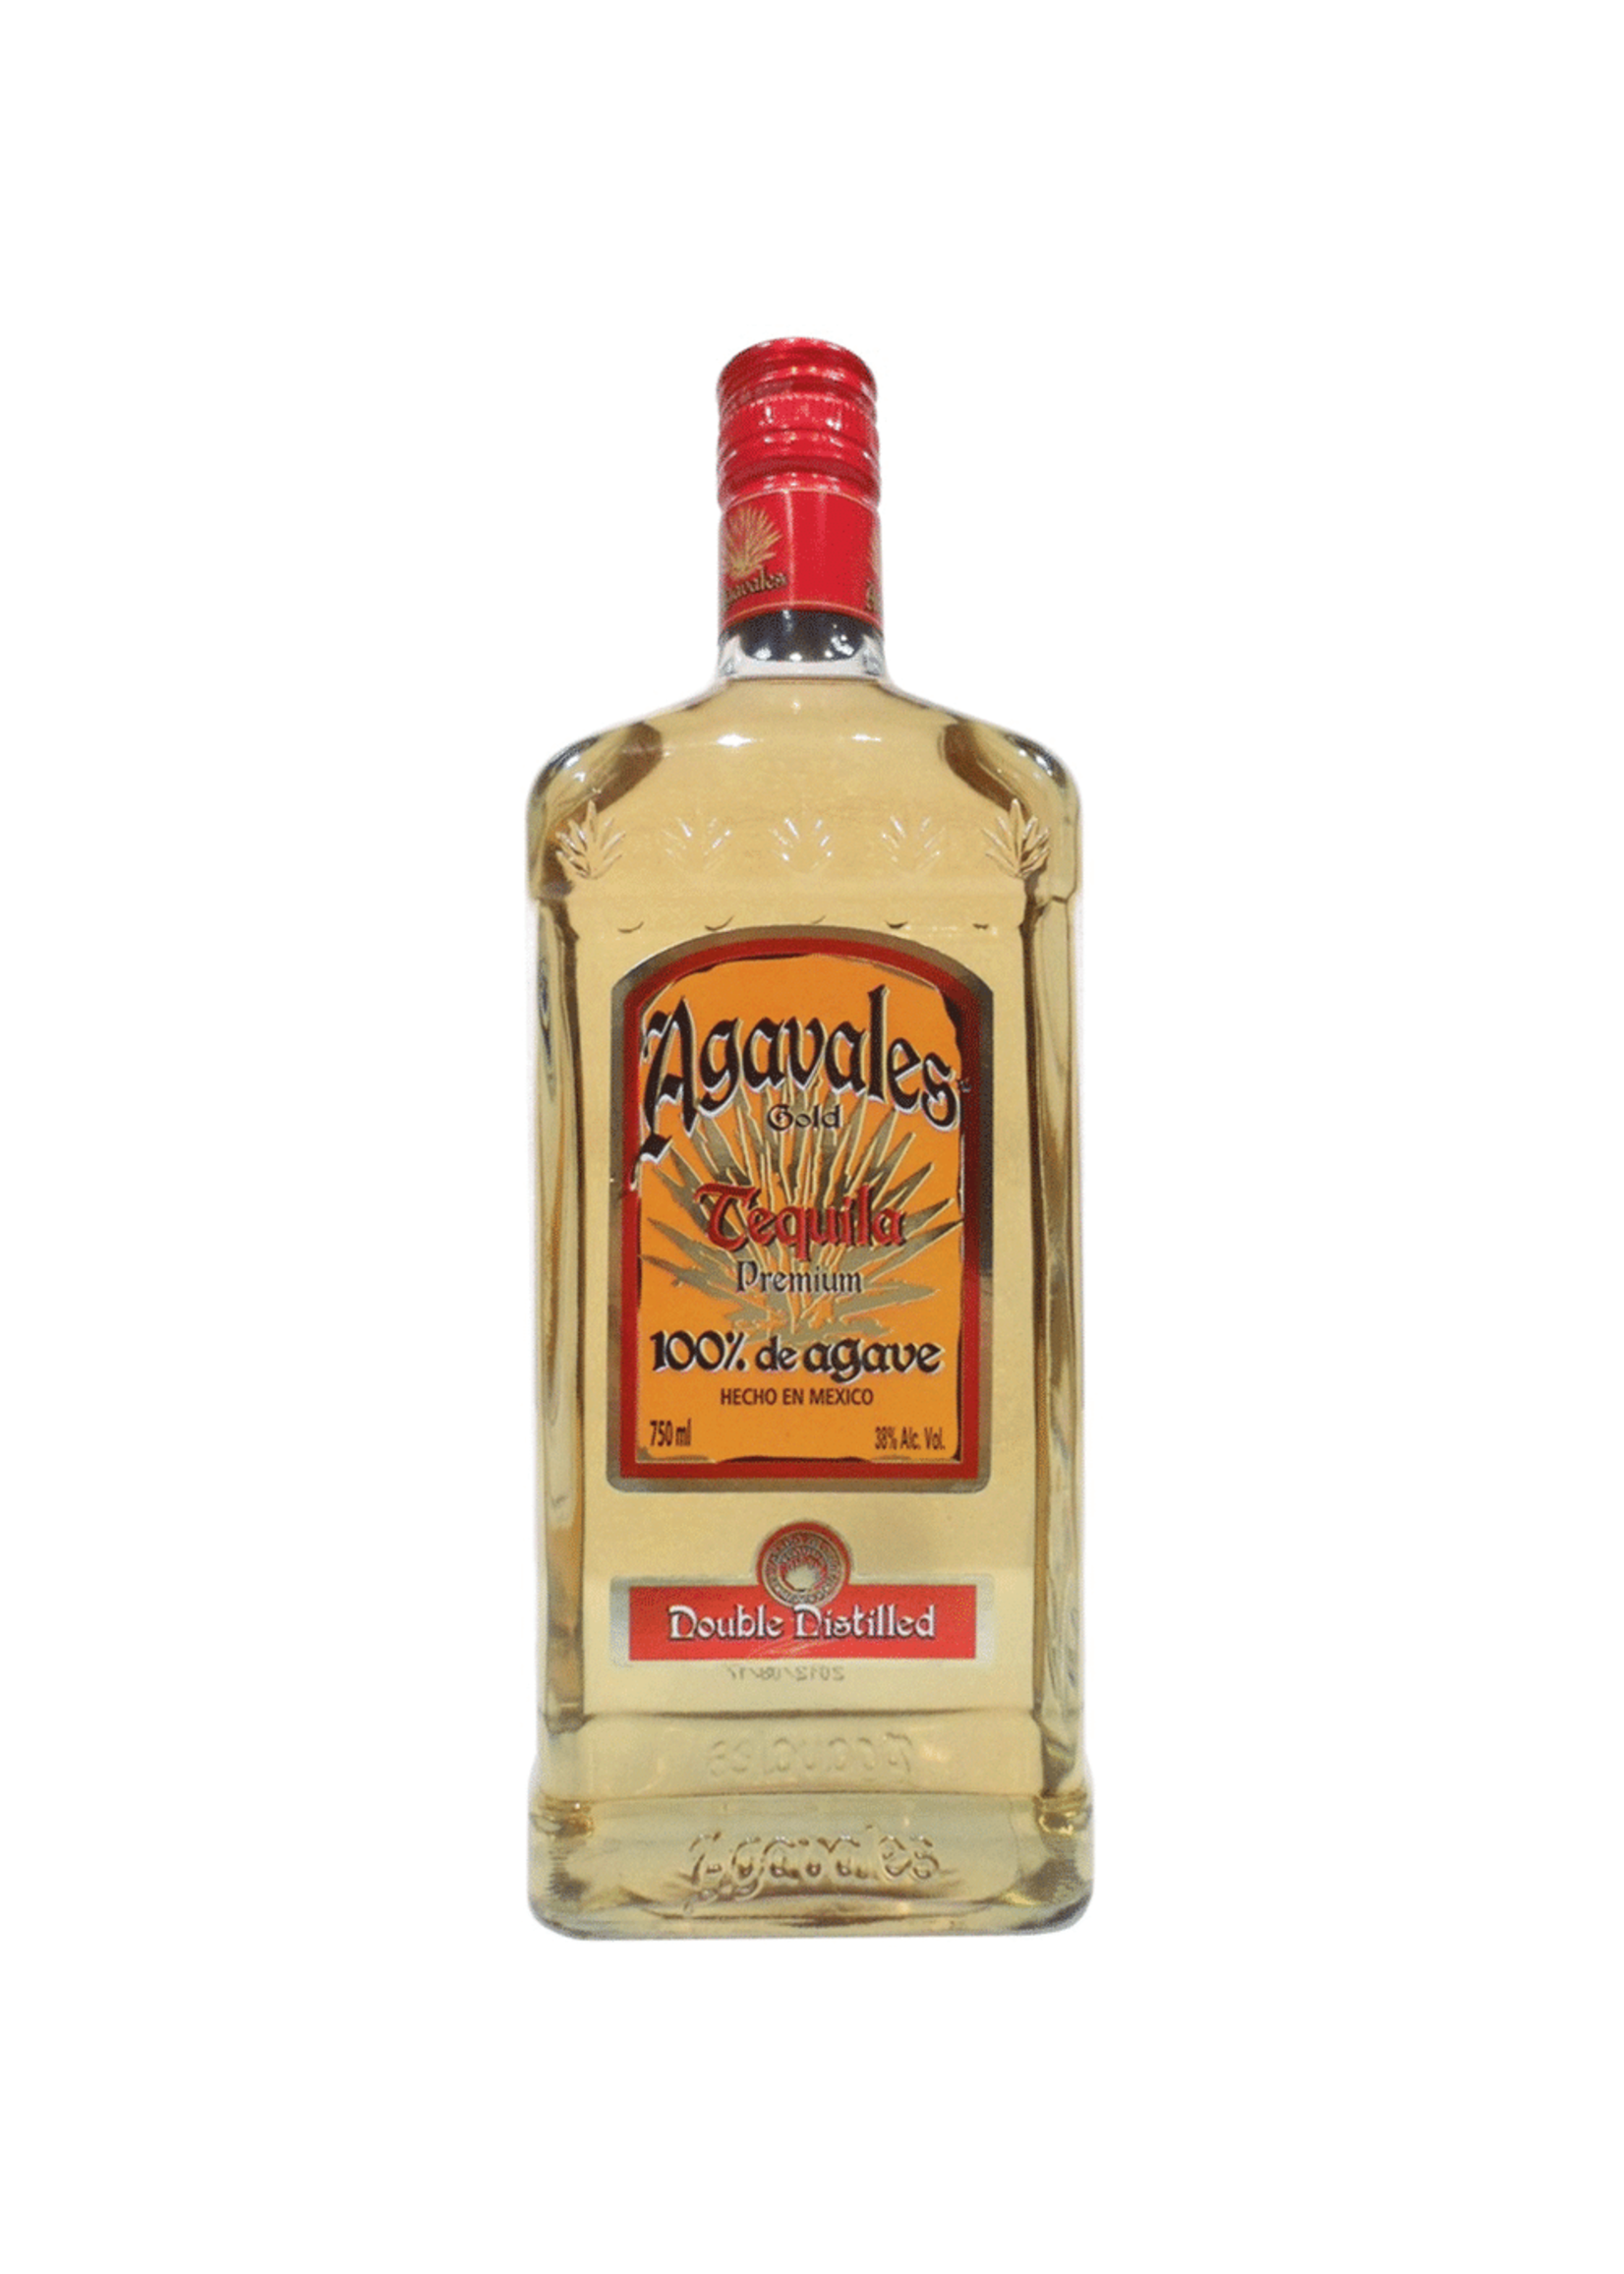 Agavales Gold Tequila 80Proof 750ml